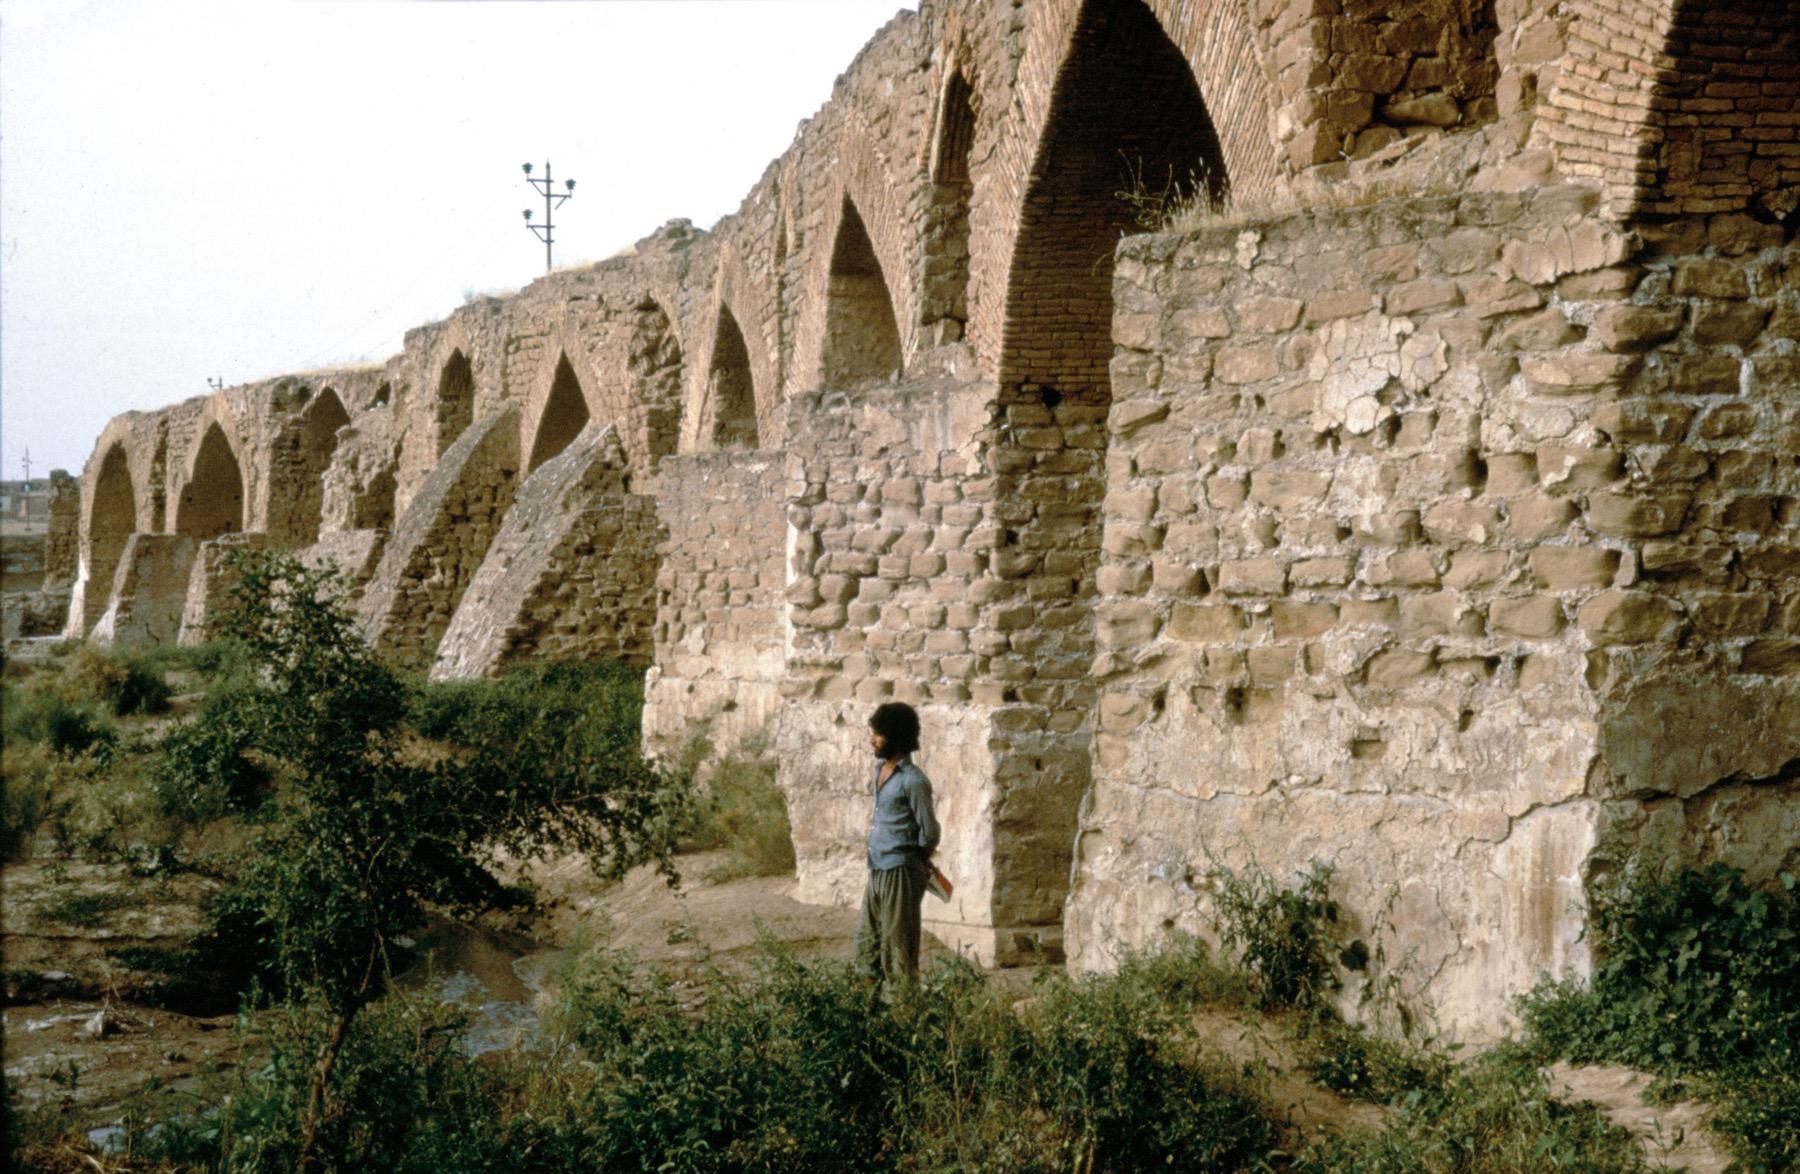 View of stone piers and brick vaults